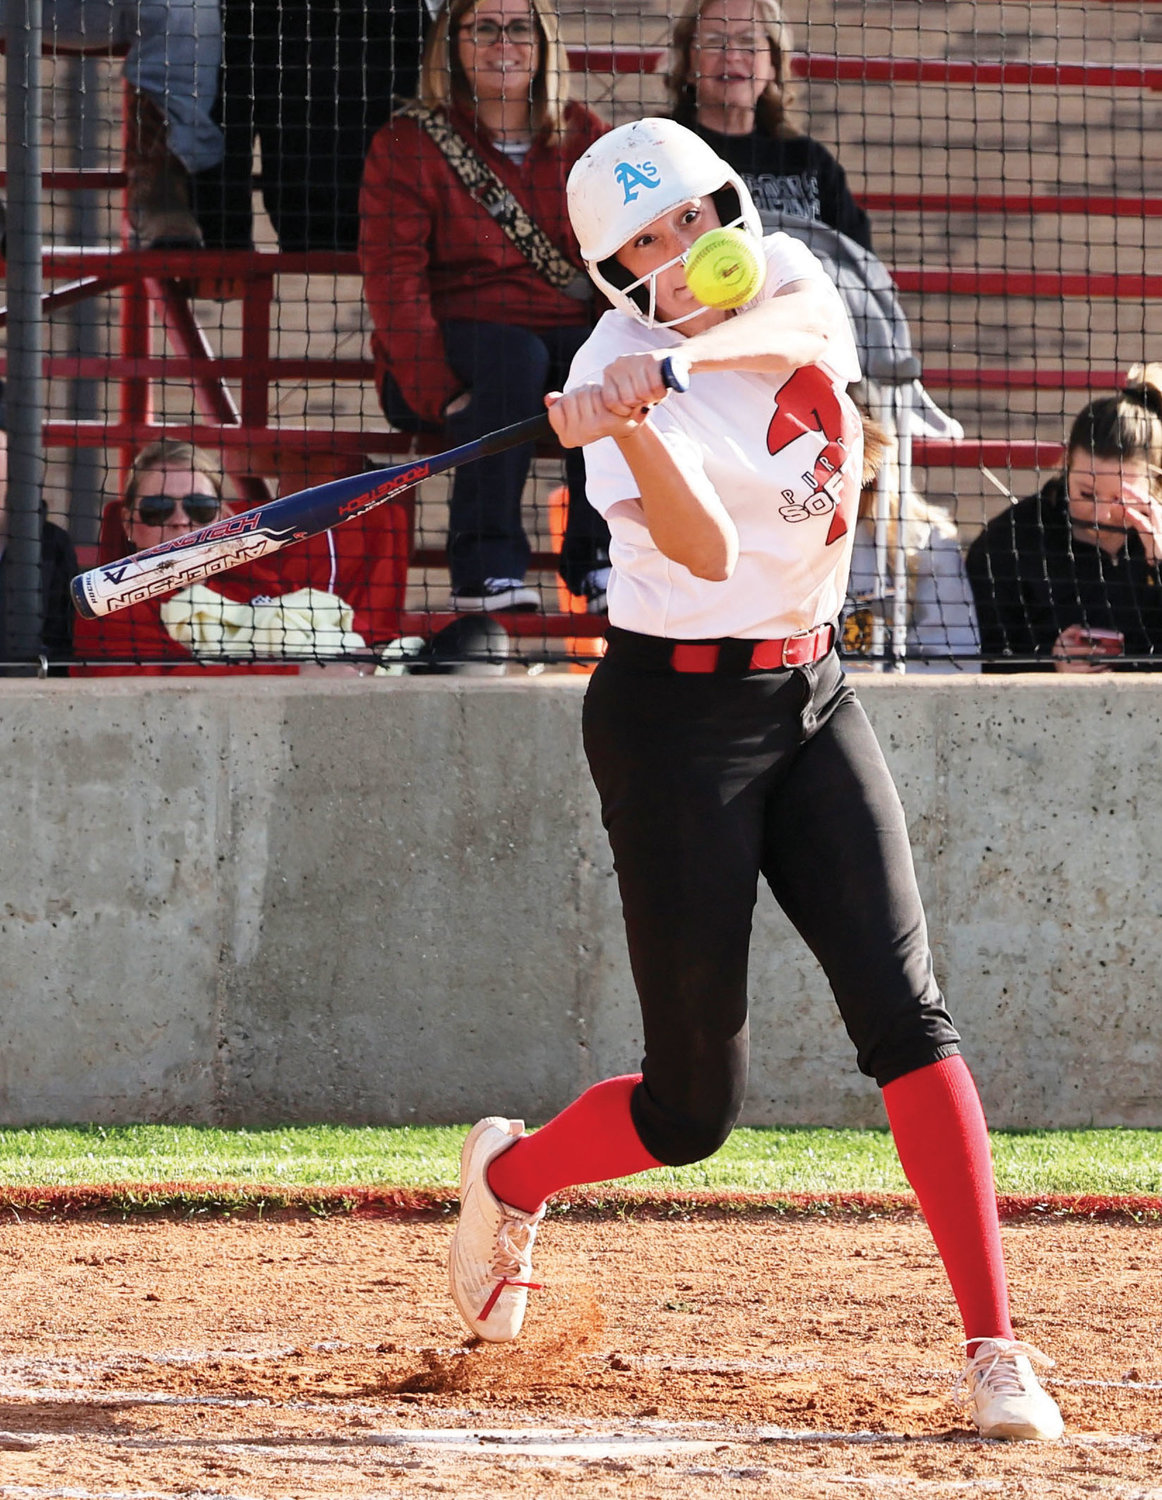 Purcell sophomore Ella Resendiz tees off on a ball for a double during the Dragons’ 5-3 win over Blanchard Monday. Resendiz was 3-3 in the game.